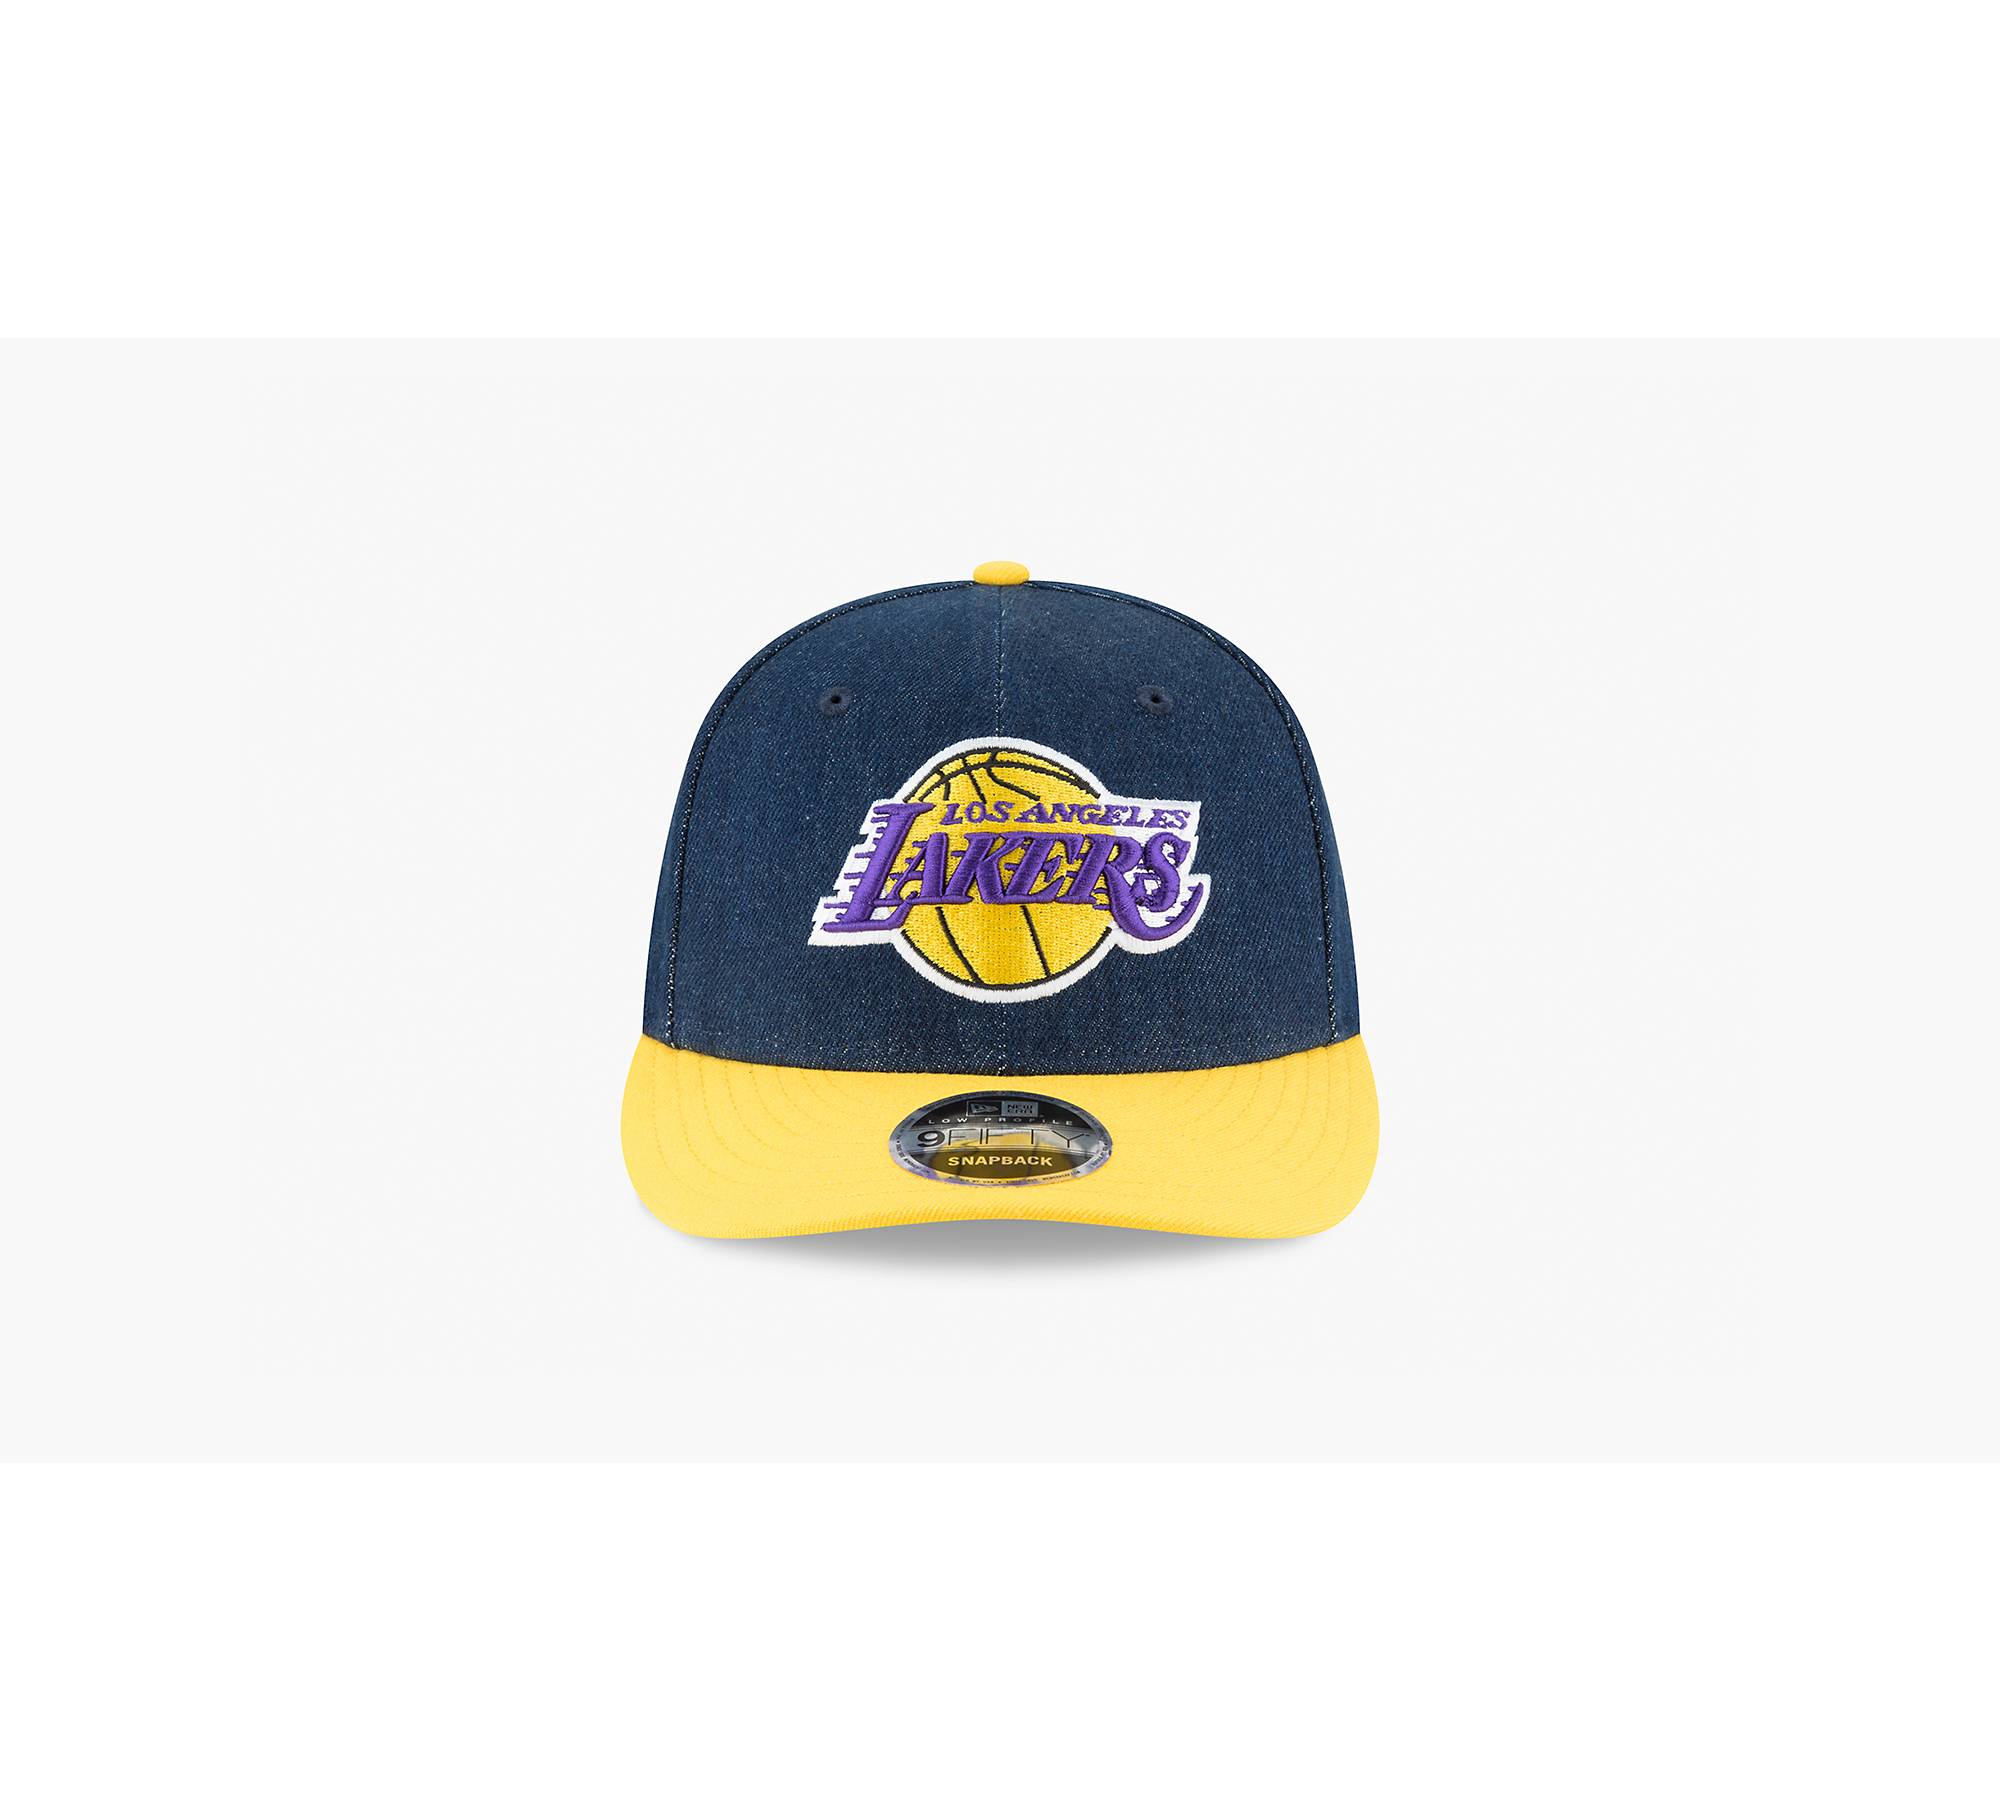 New Era 9fifty Lakers cap in white